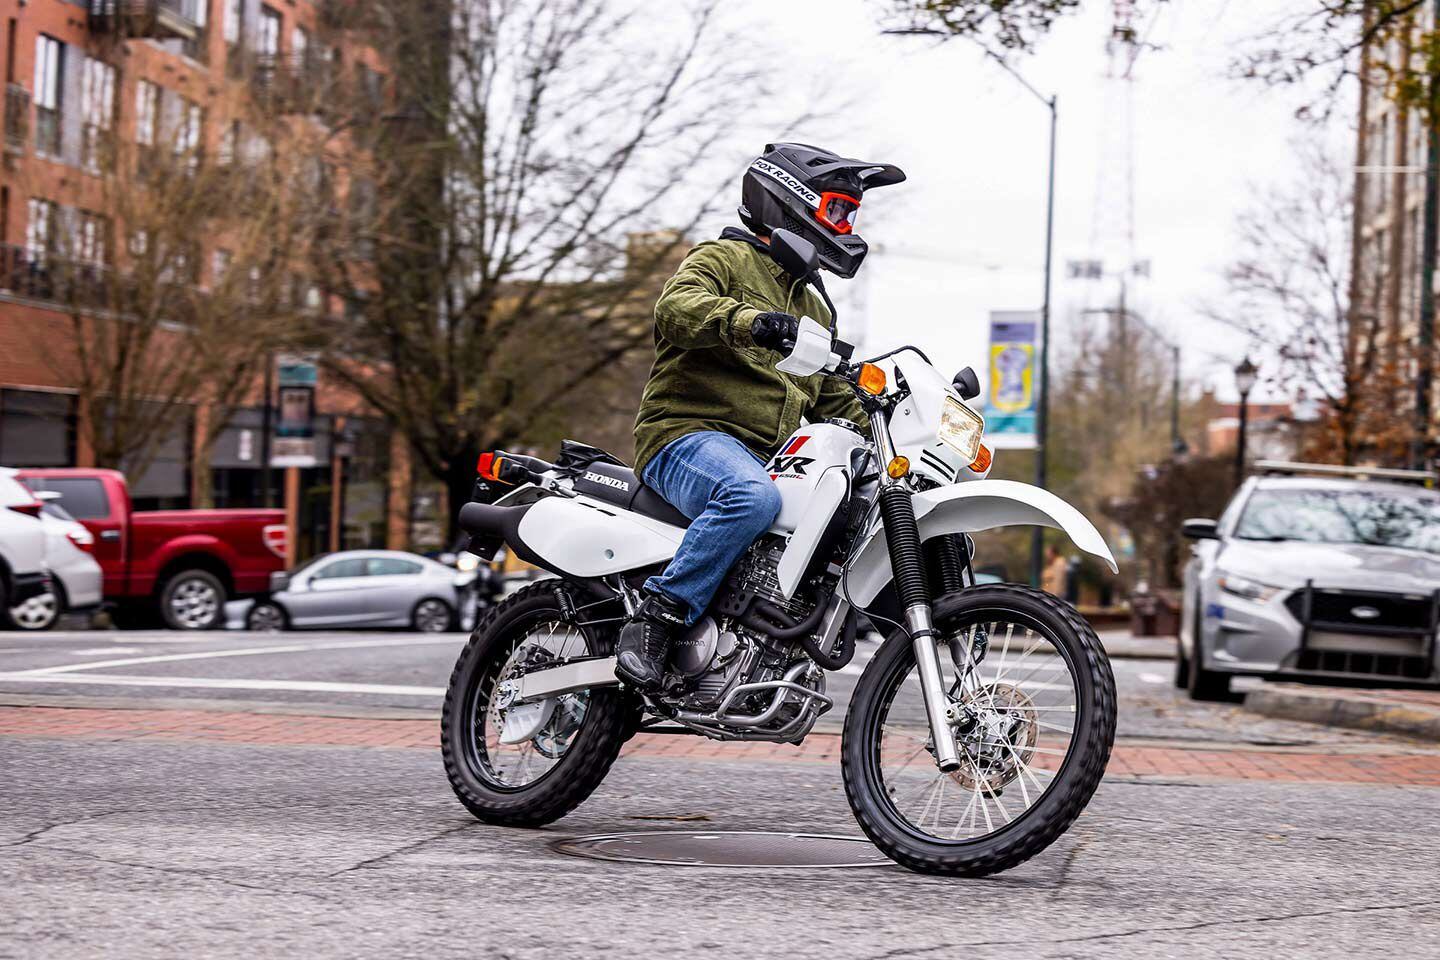 A tall-in-the-saddle seating position means the XR-L affords the rider a great view over cars. The downside is inseam-challenged riders will struggle with the 37-inch seat height.